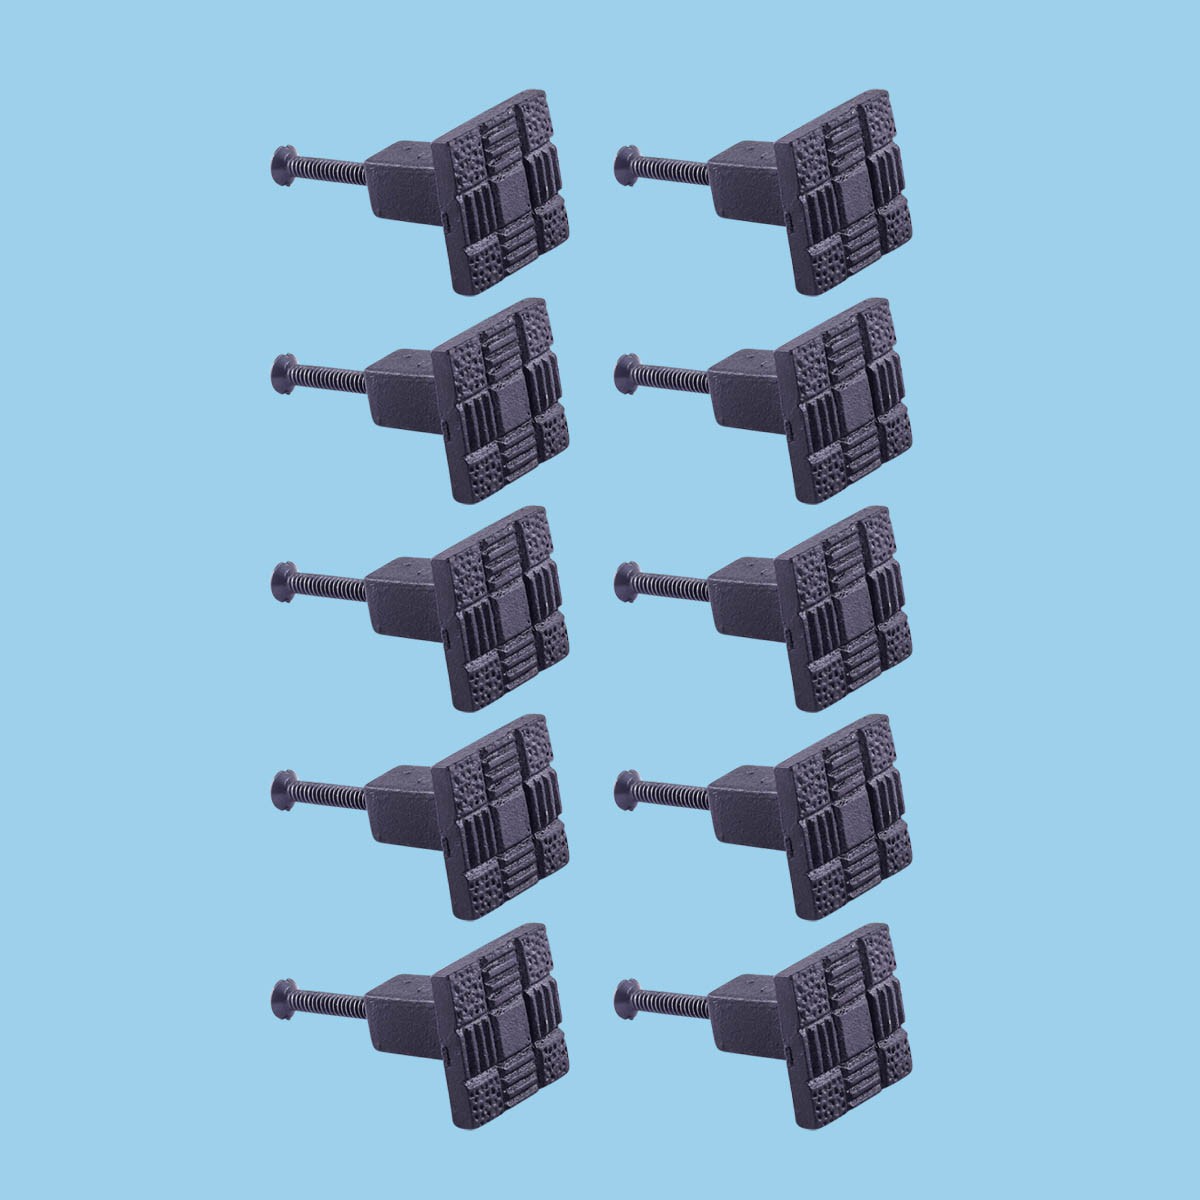 Renovators Supply Black Square Wrought Iron Cabinet Knob Pull Decorative Aztec Rust Resistant Vintage Metal Knobs for Kitchen Cabinet or Drawer Handles w/Screws Pack of 10 - image 2 of 8